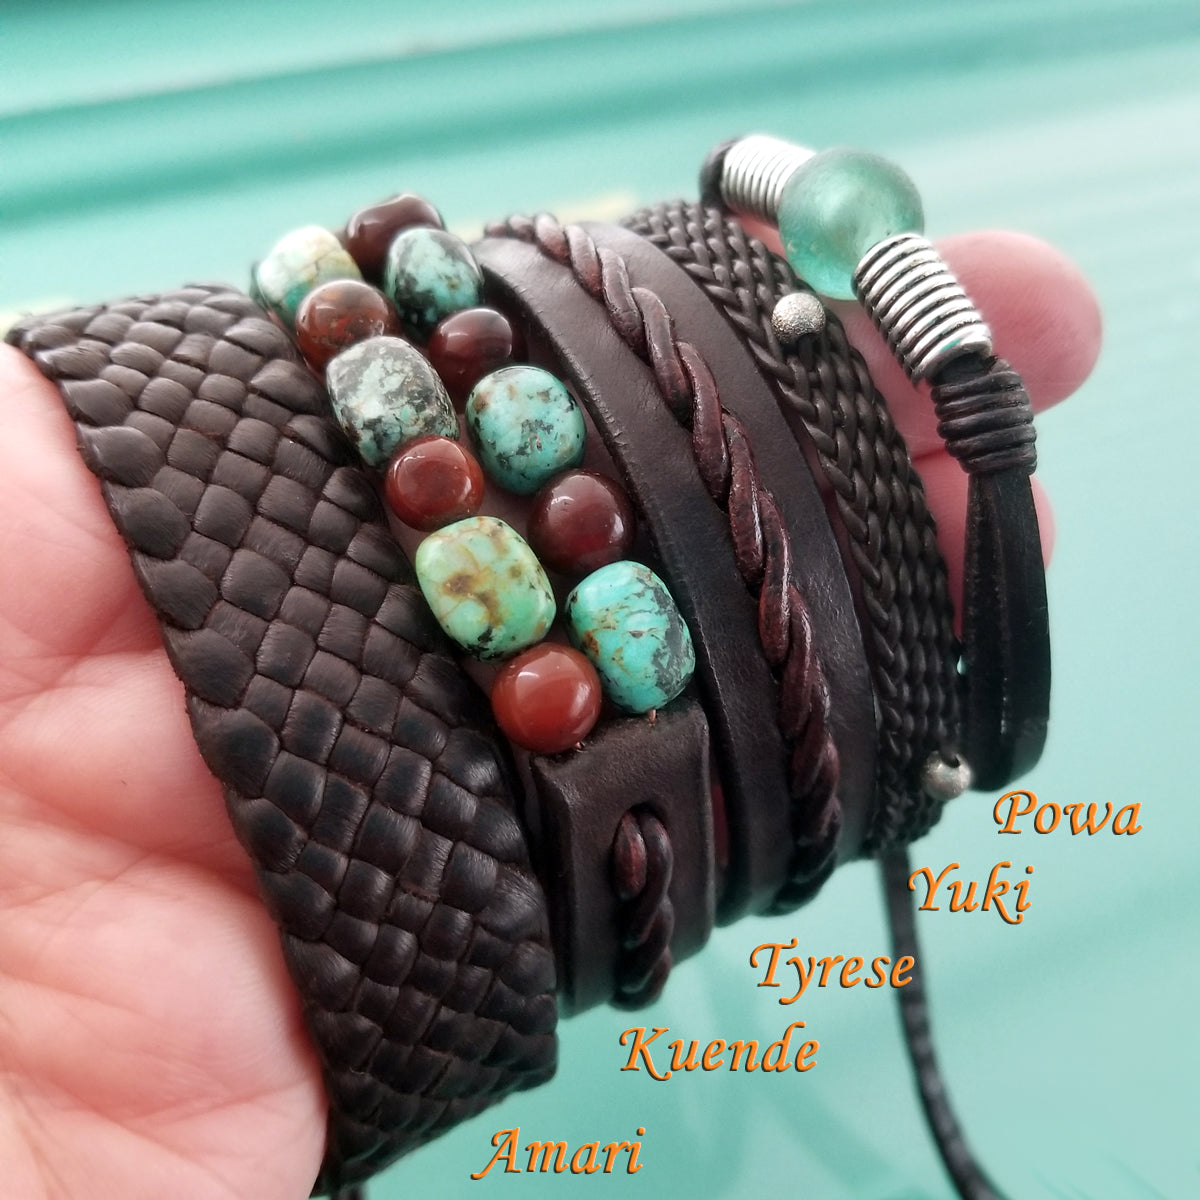 Designer, Lisa Cantalupo's collection of 5 of her favorite to make and favorite to wear leather bracelets with product names